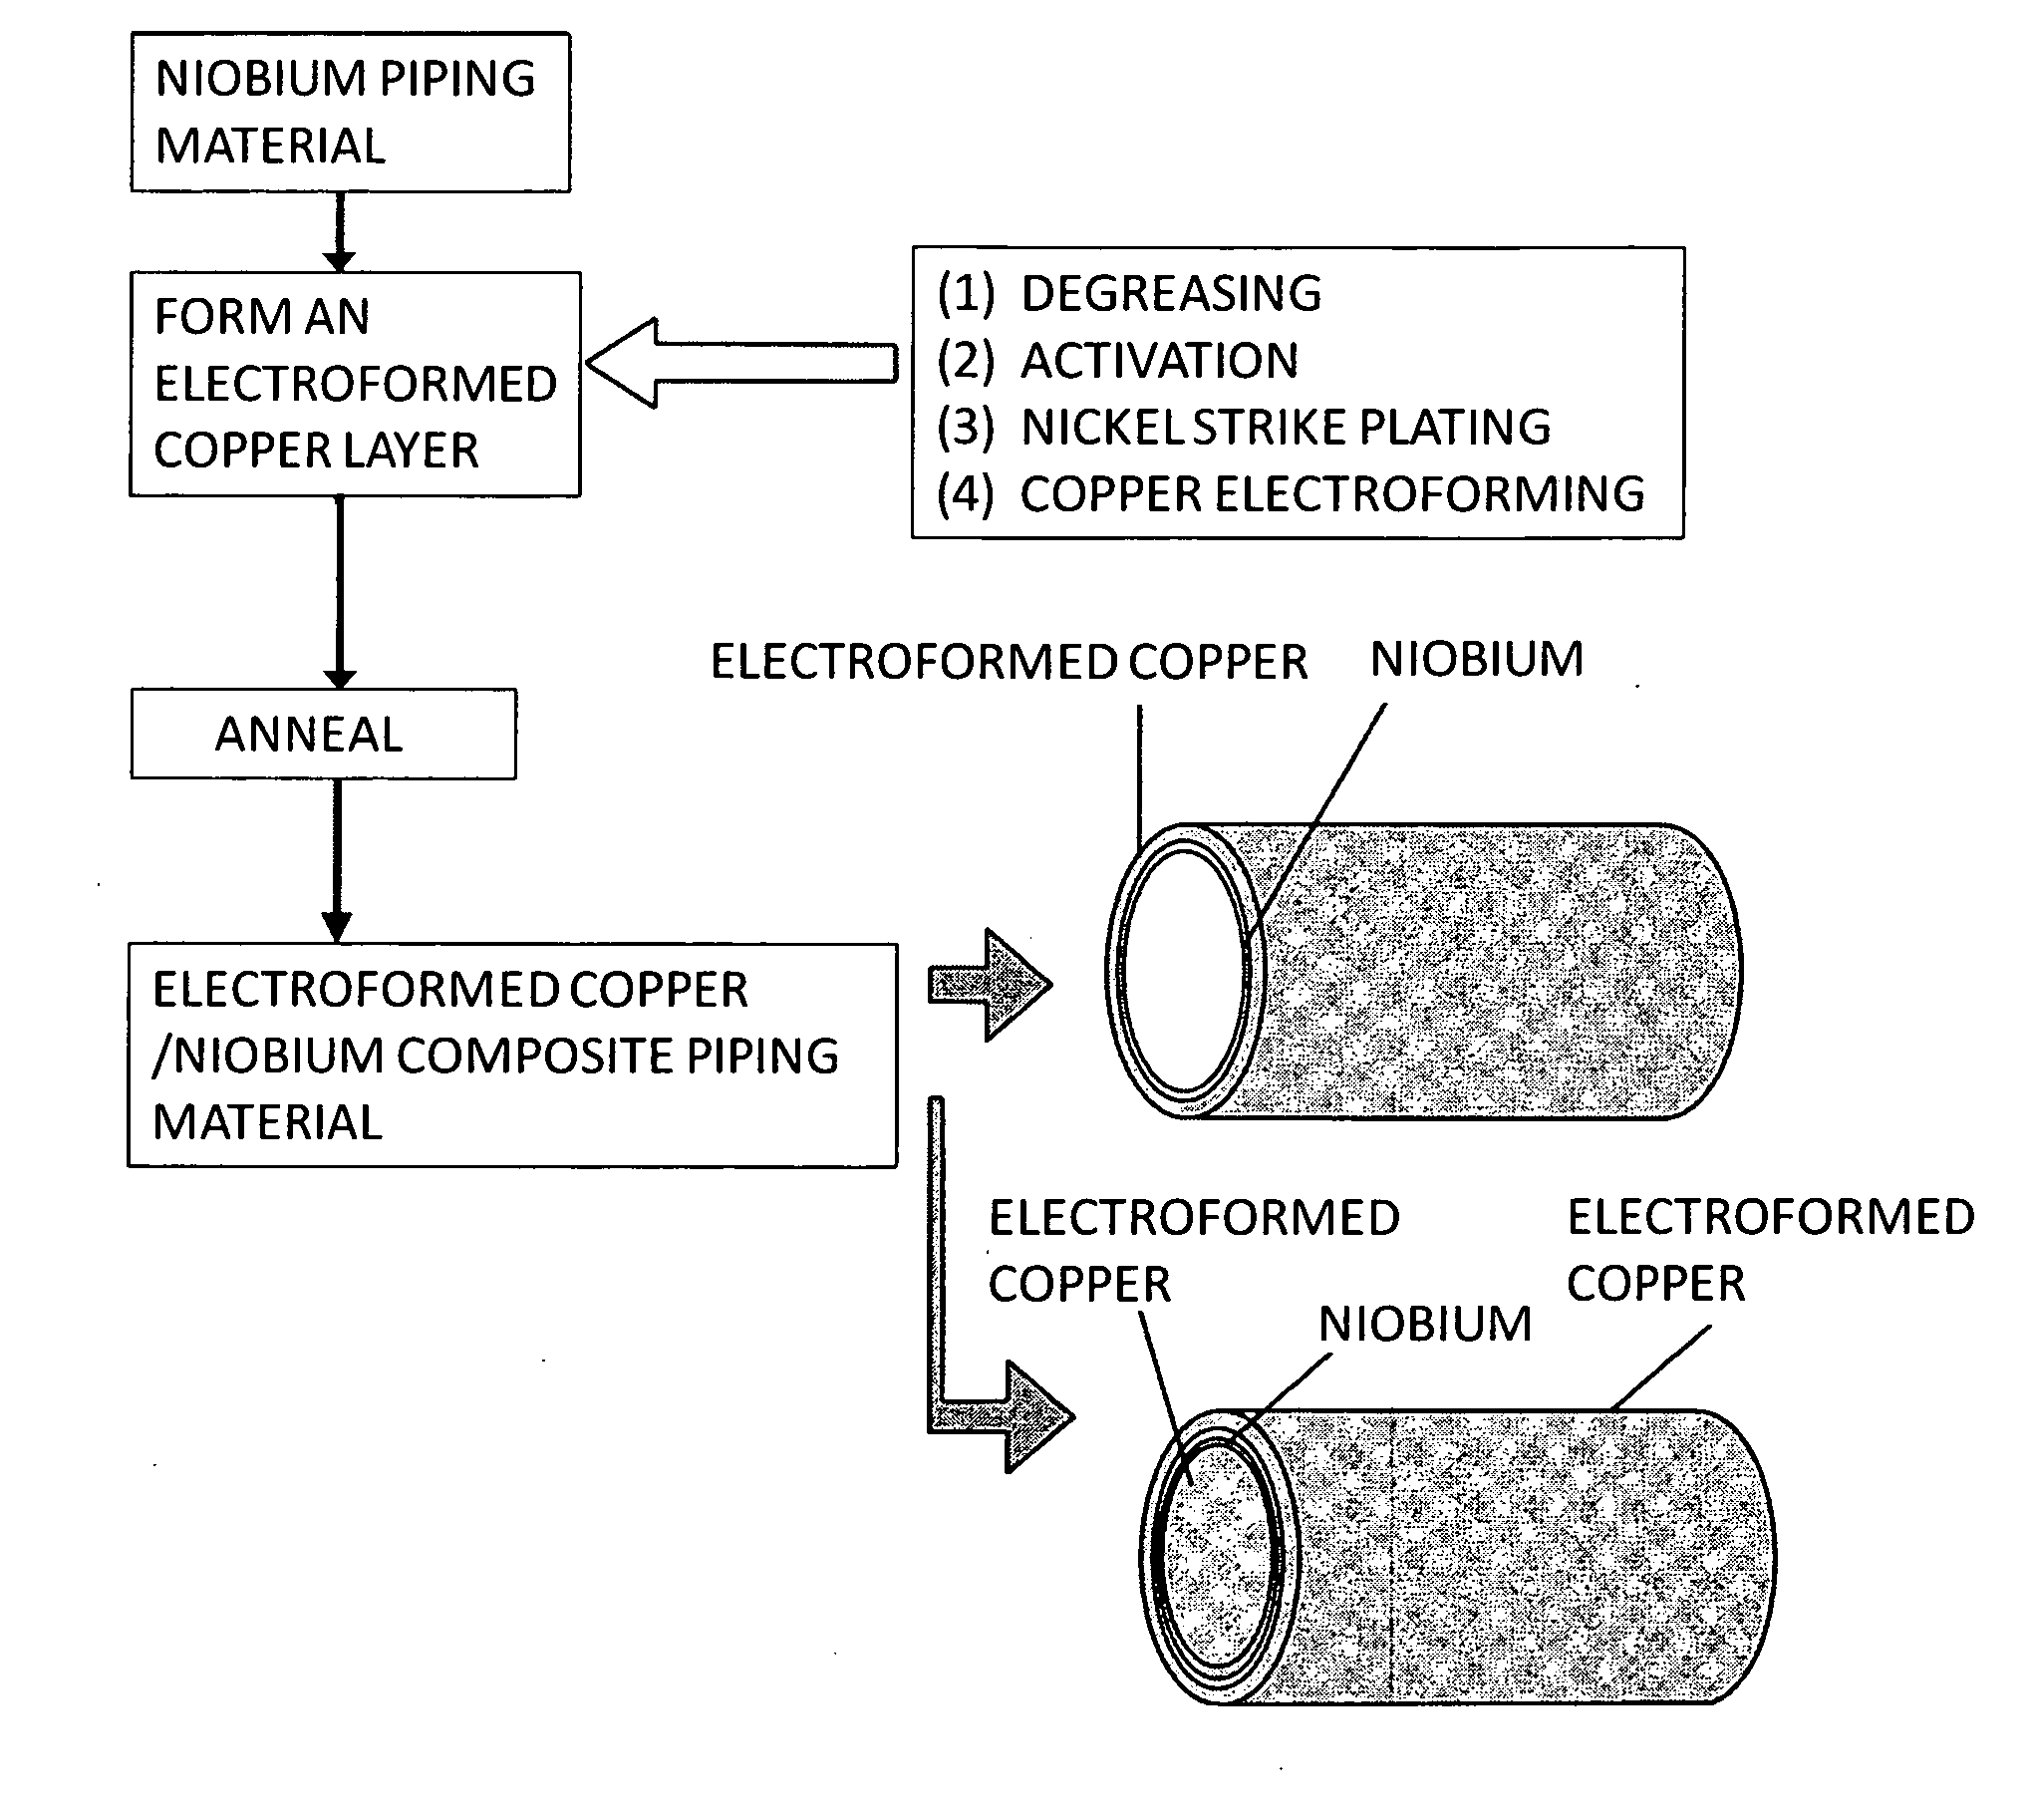 Copper/niobium composite piping material produced by copper electroforming, process for producing the same and superconducting, acceleration cavity produced from the composite piping material